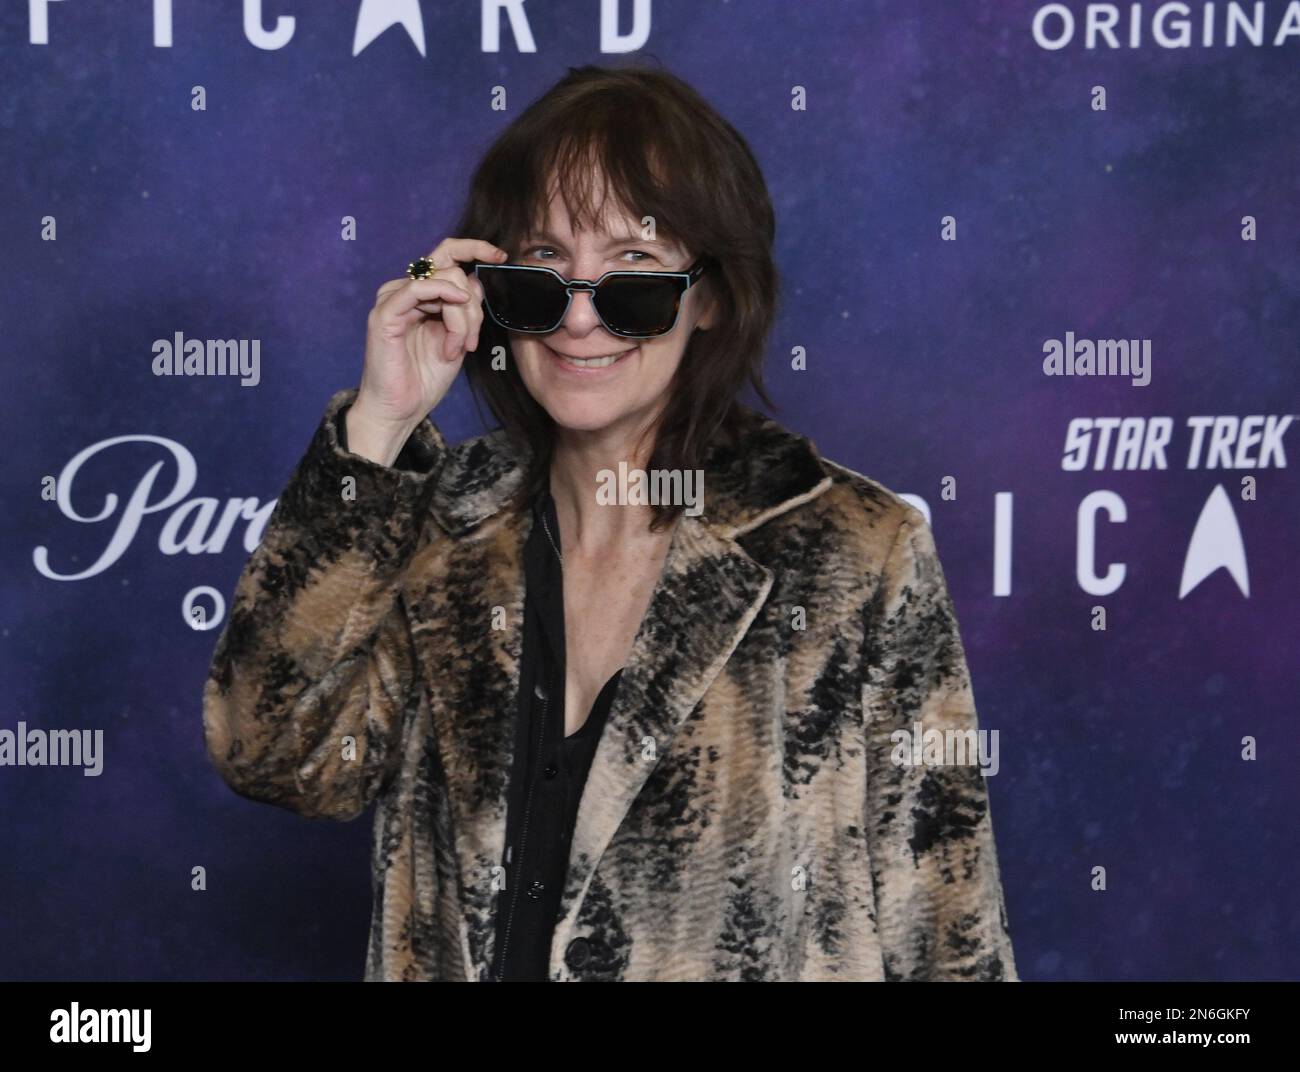 Los Angeles, United States. 09th Feb, 2023. Cast member Amanda Plummer attends the final season premiere of 'Star Trek: Picard' at the TCL Chinese Theatre in the Hollywood section of Los Angeles on Thursday, February 9, 2023. Photo by Jim Ruymen/UPI Credit: UPI/Alamy Live News Stock Photo